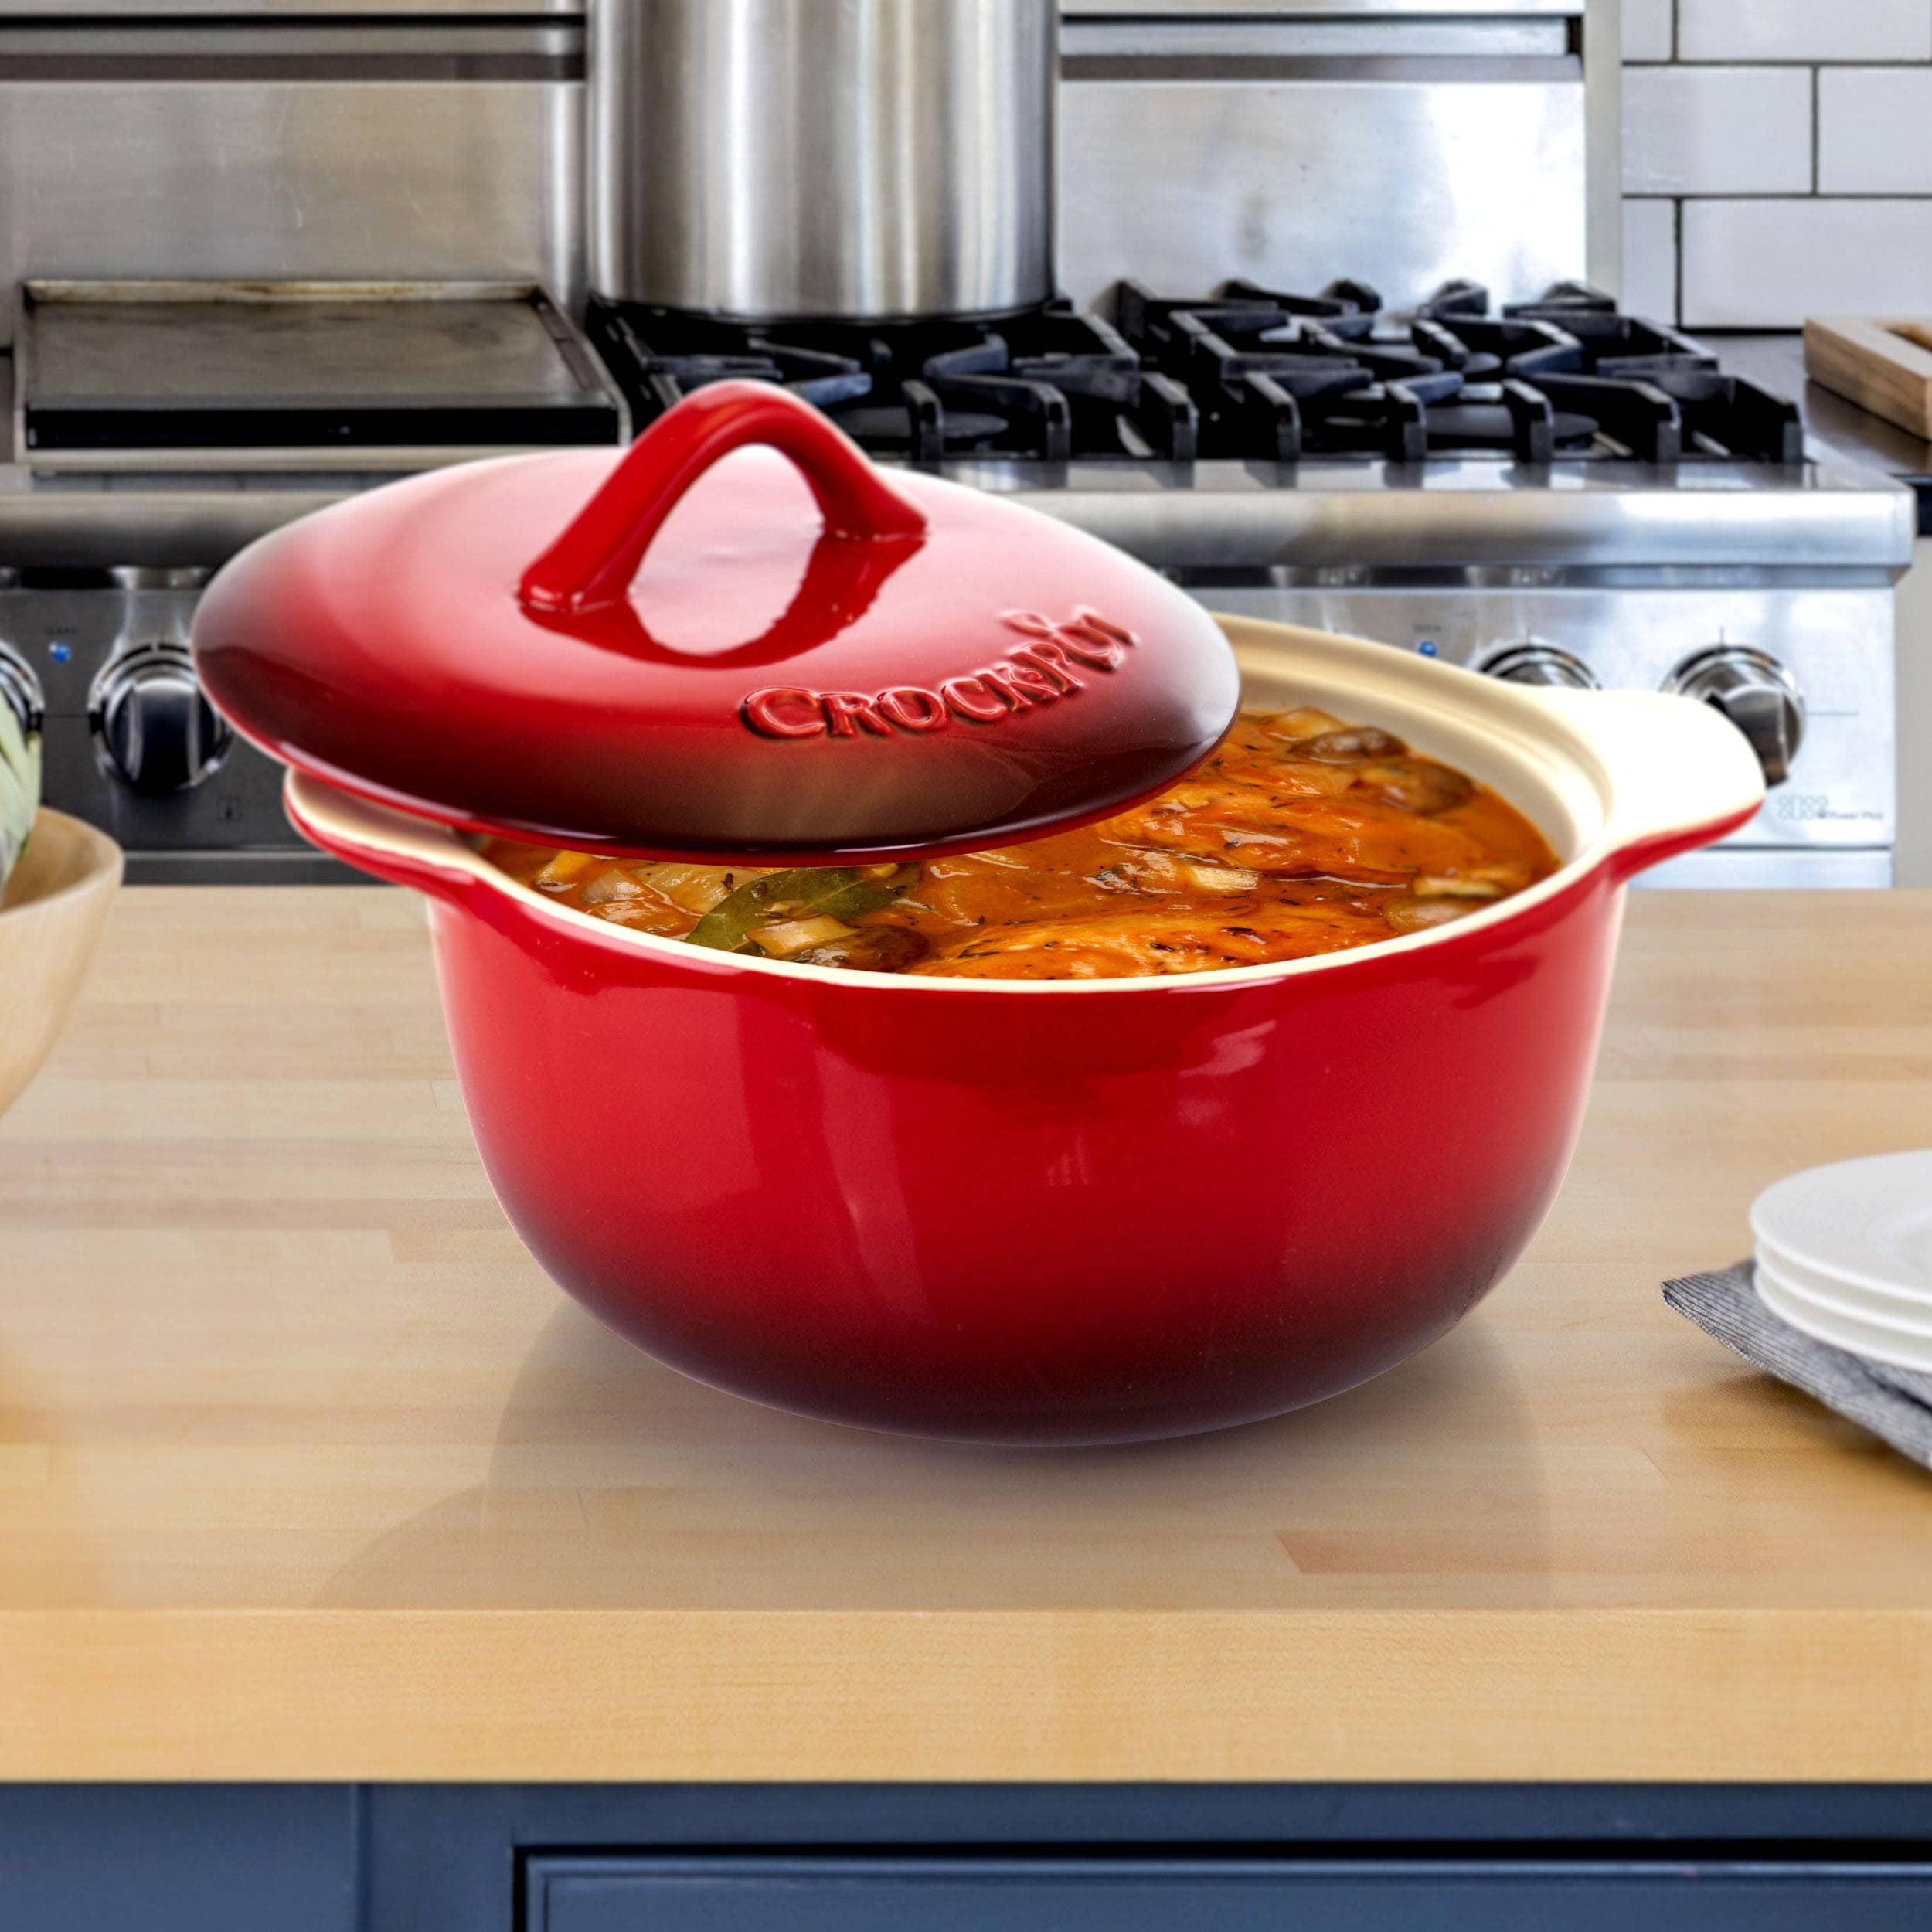 SlowCook Cast iron red Round Casserole - compatible with oven and